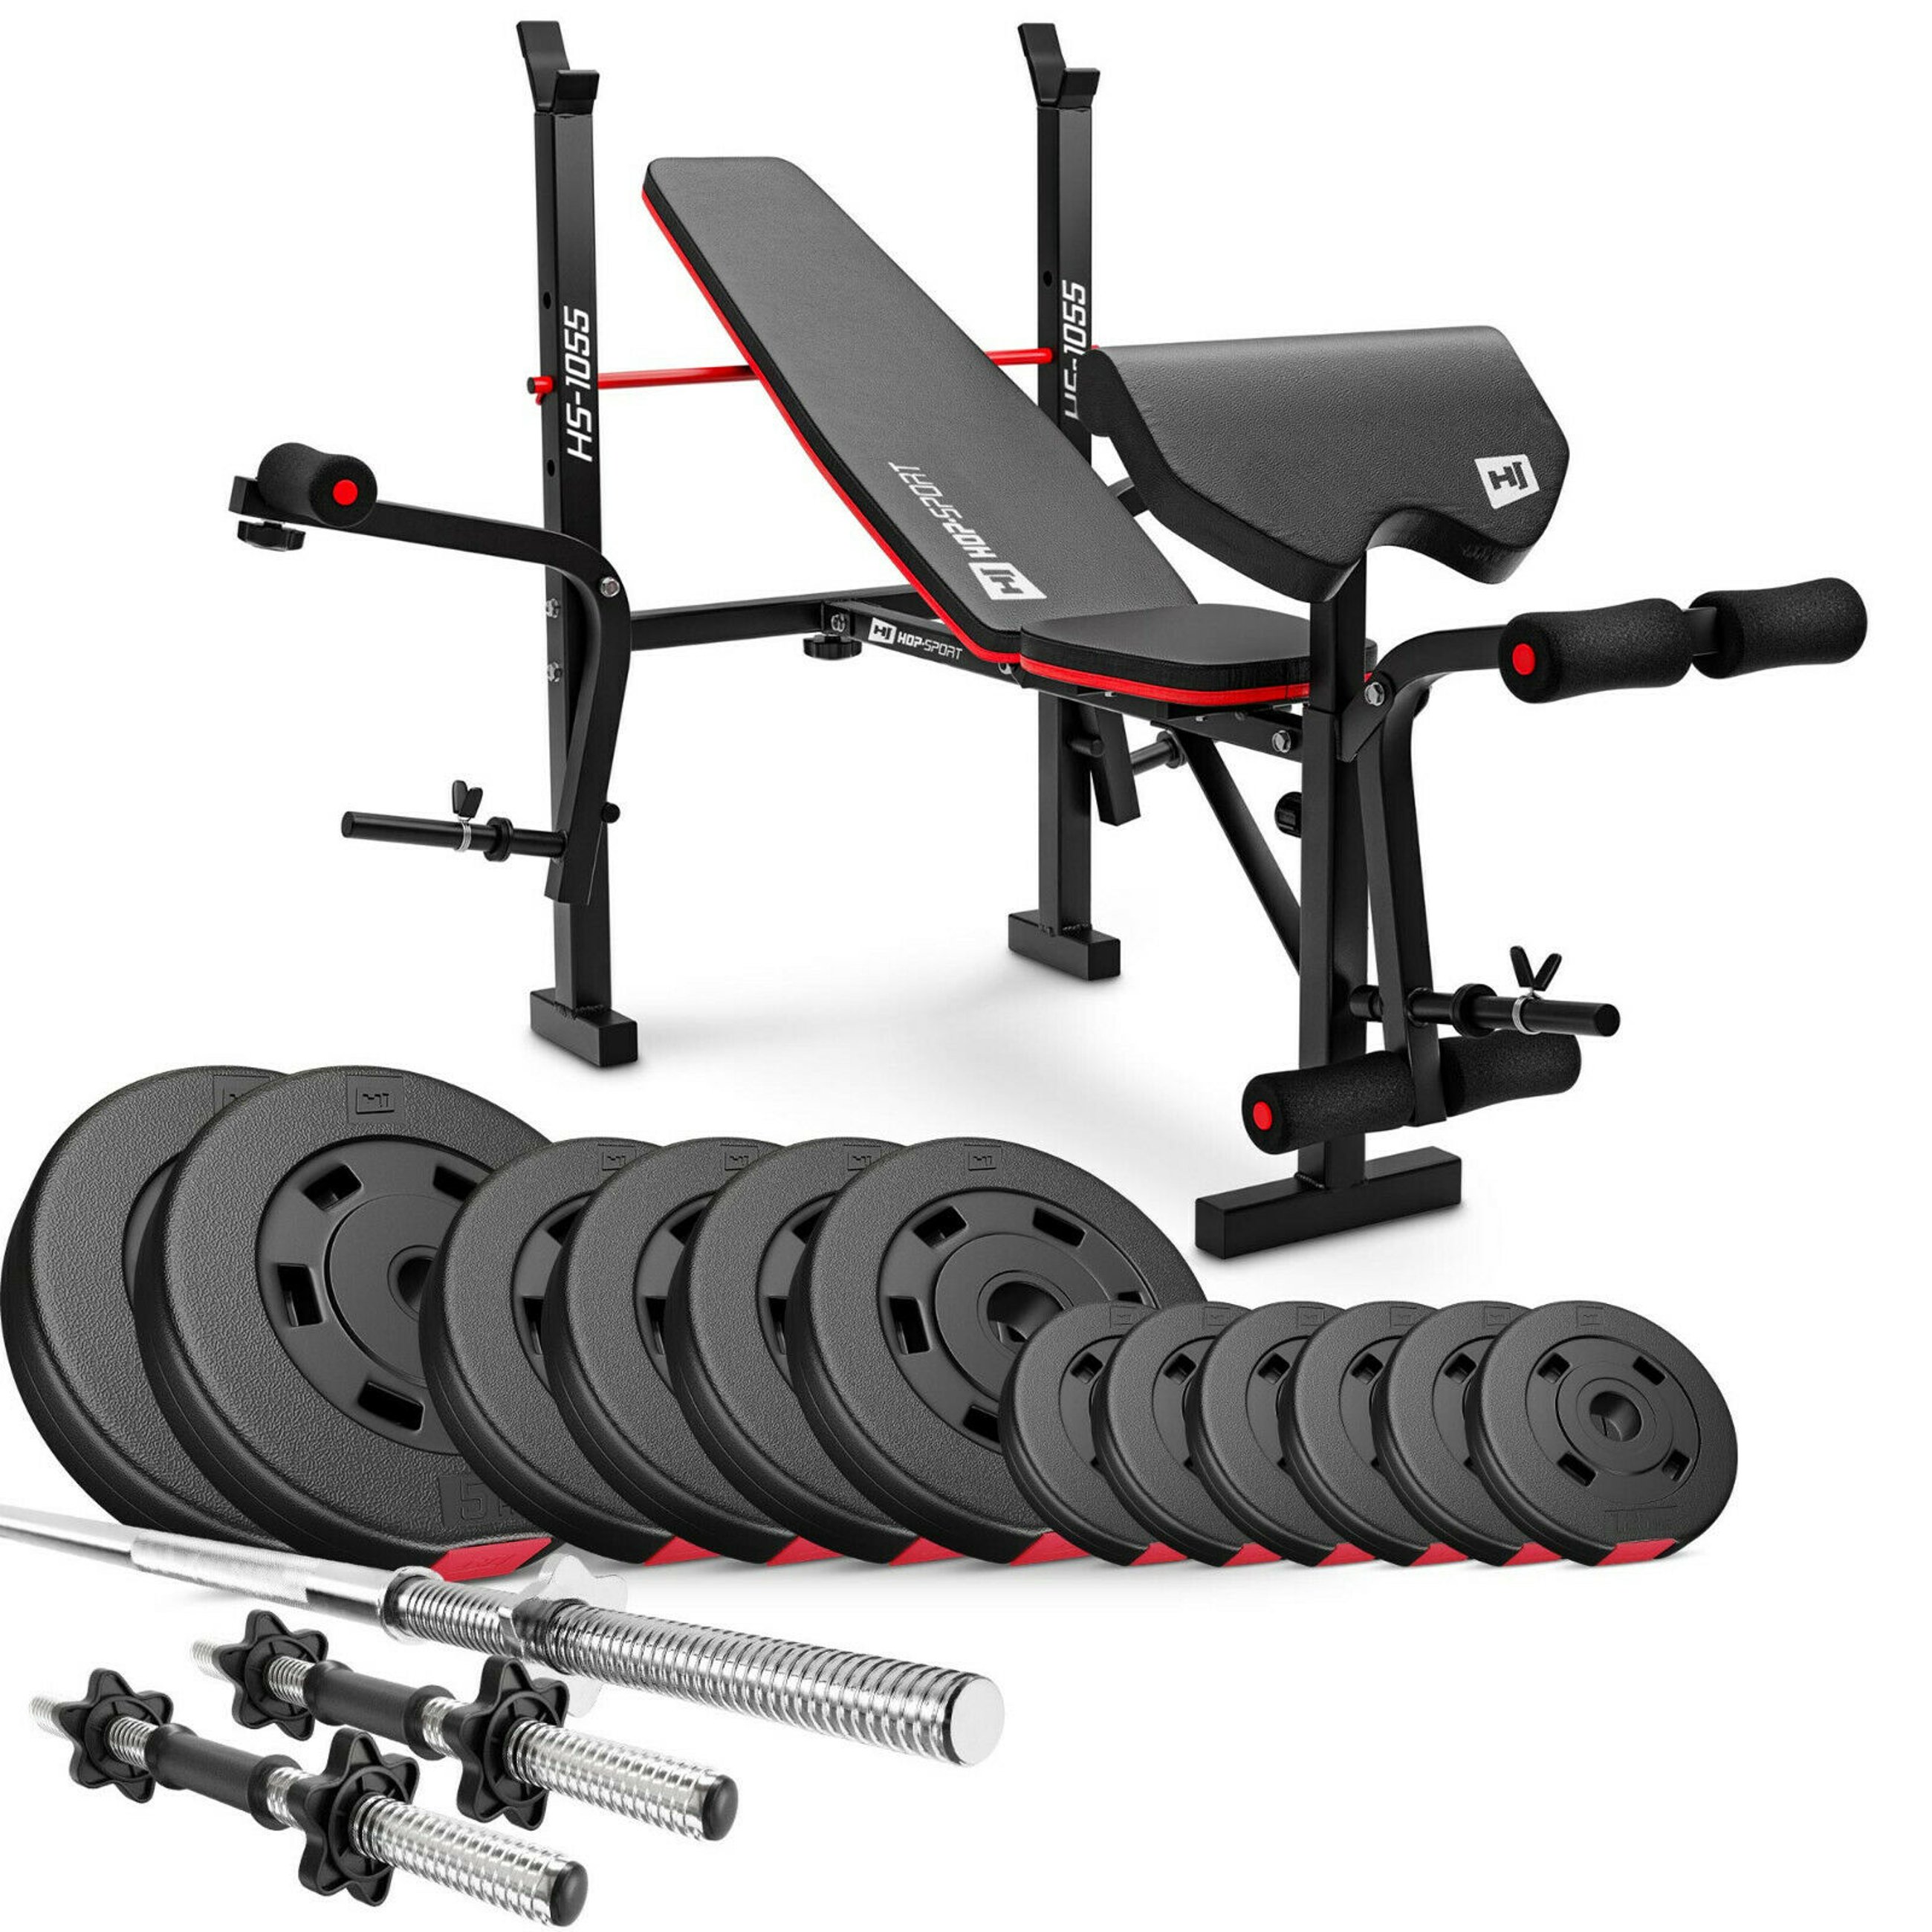 Premium 38 kg Barbell Set with HS-1055 Weight Bench